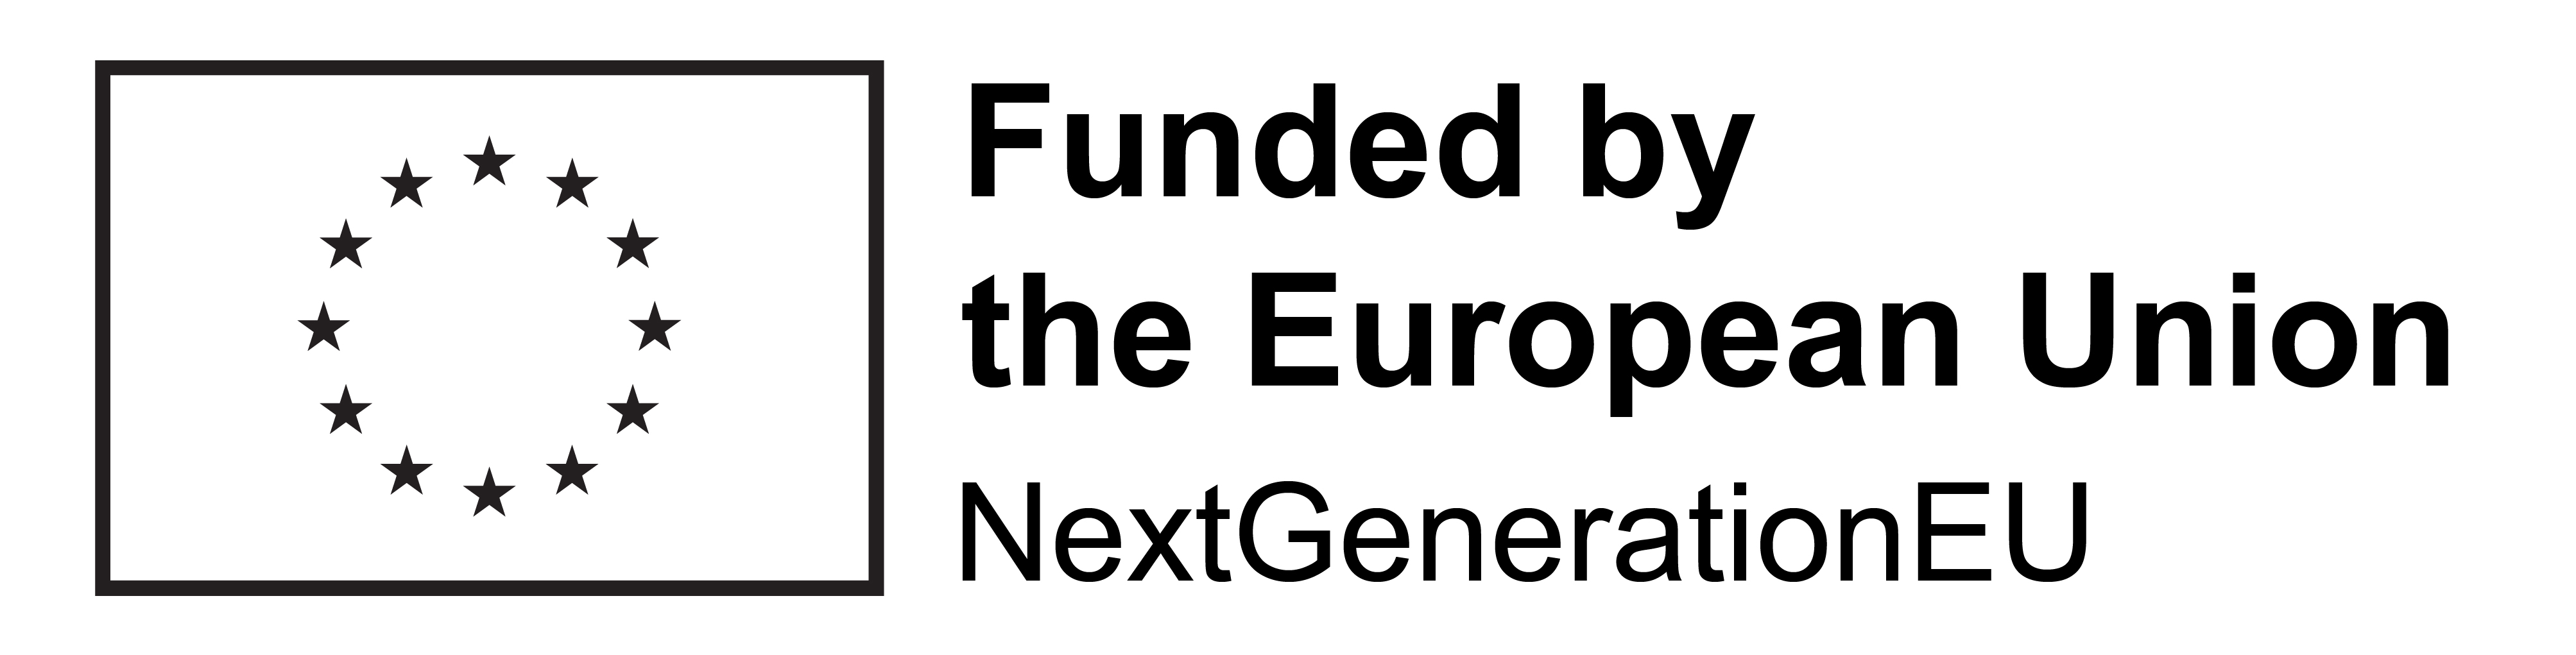 Funded by the European